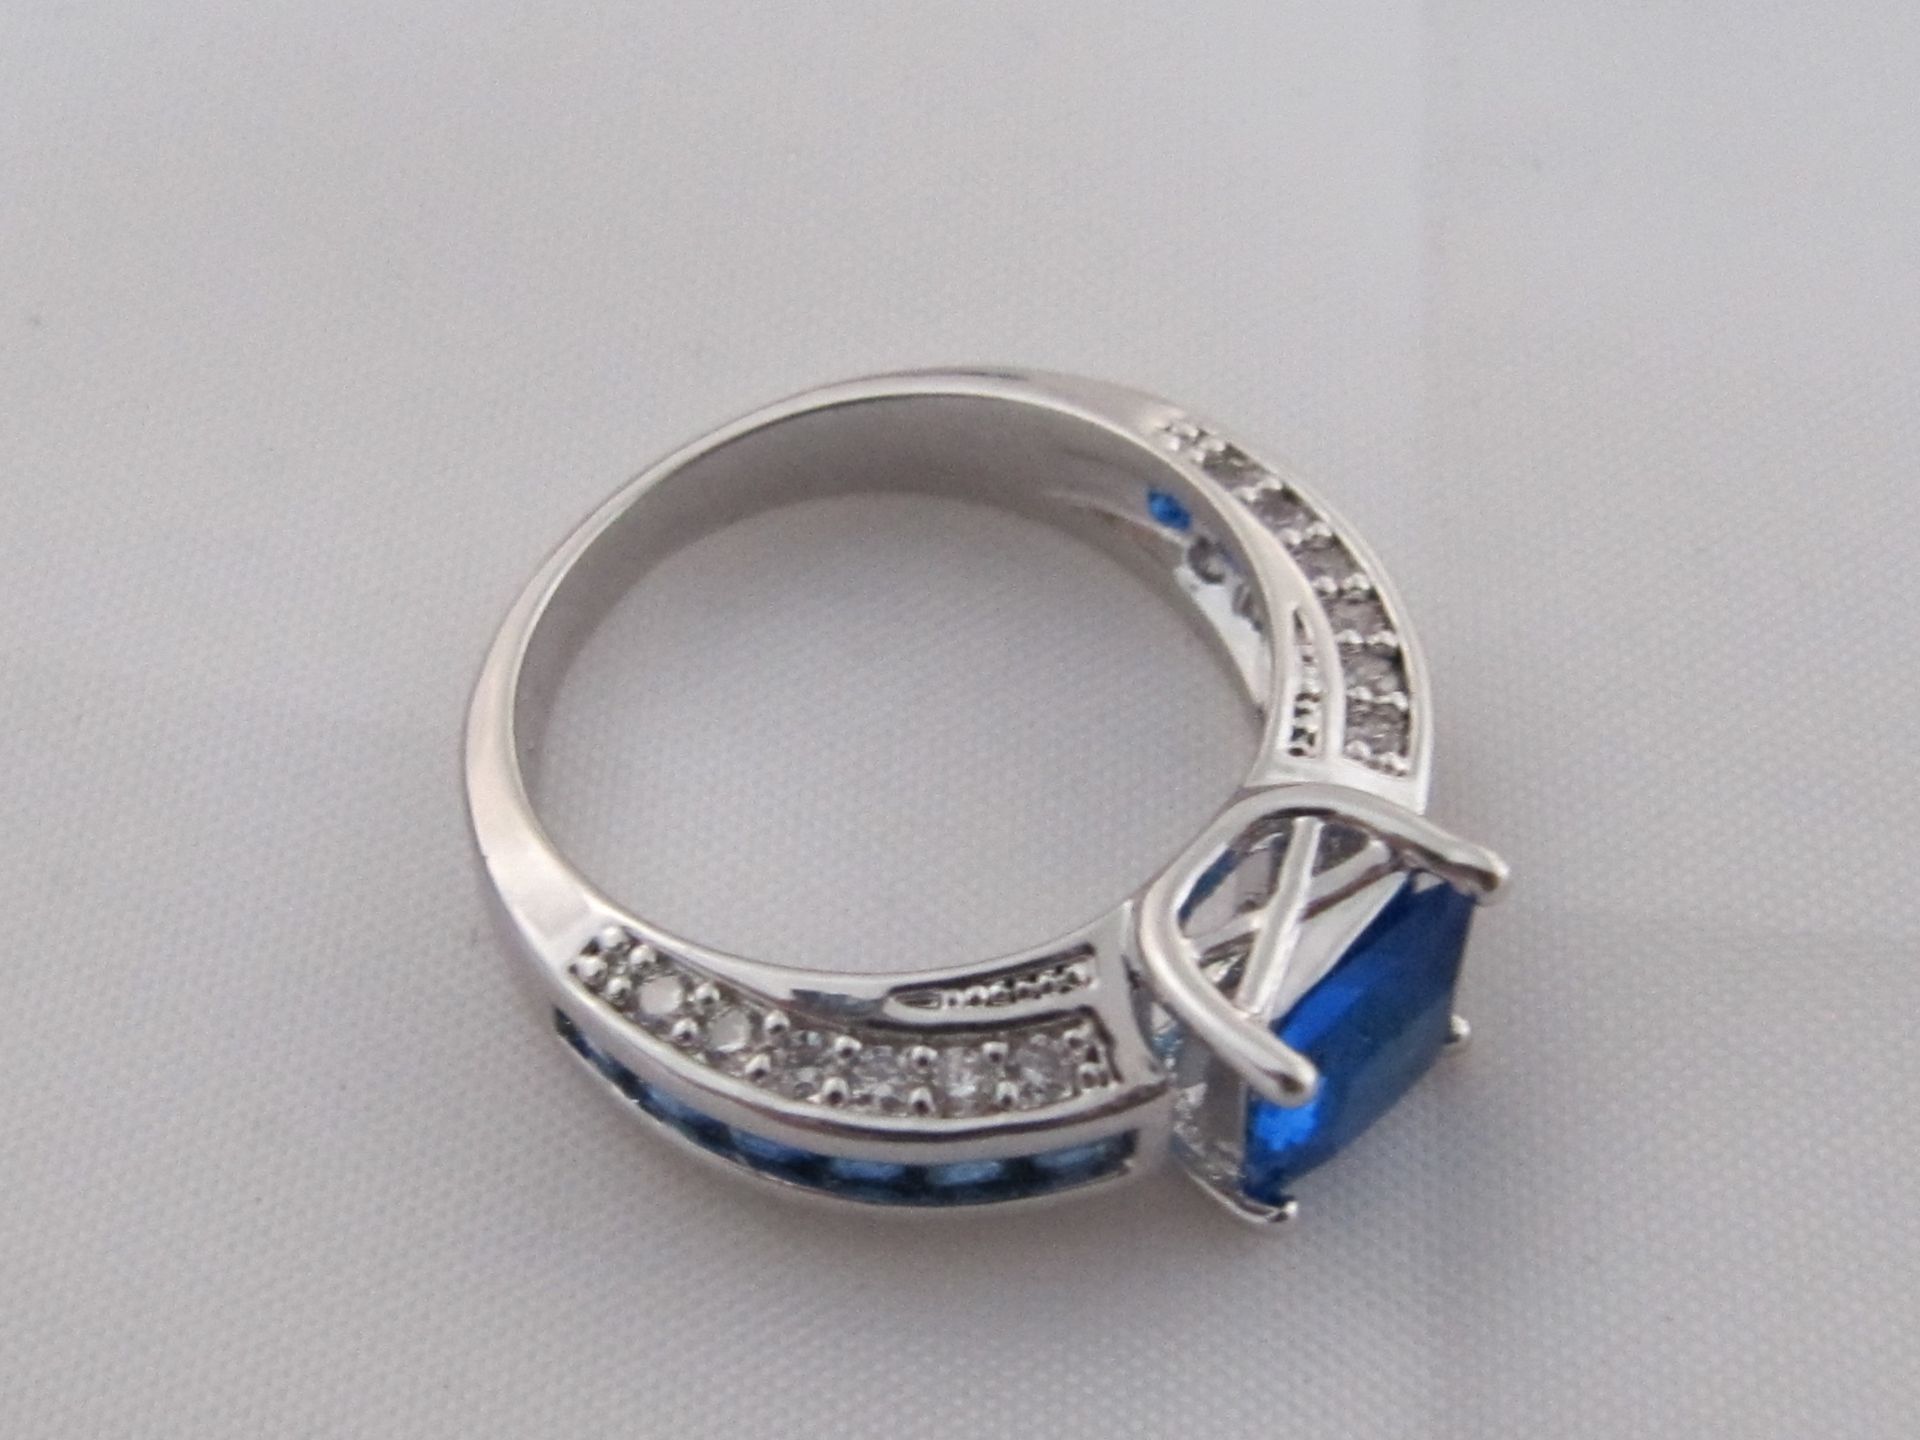 10k White Gold Filled with Blue Sapphires. Size Q. - Image 2 of 5